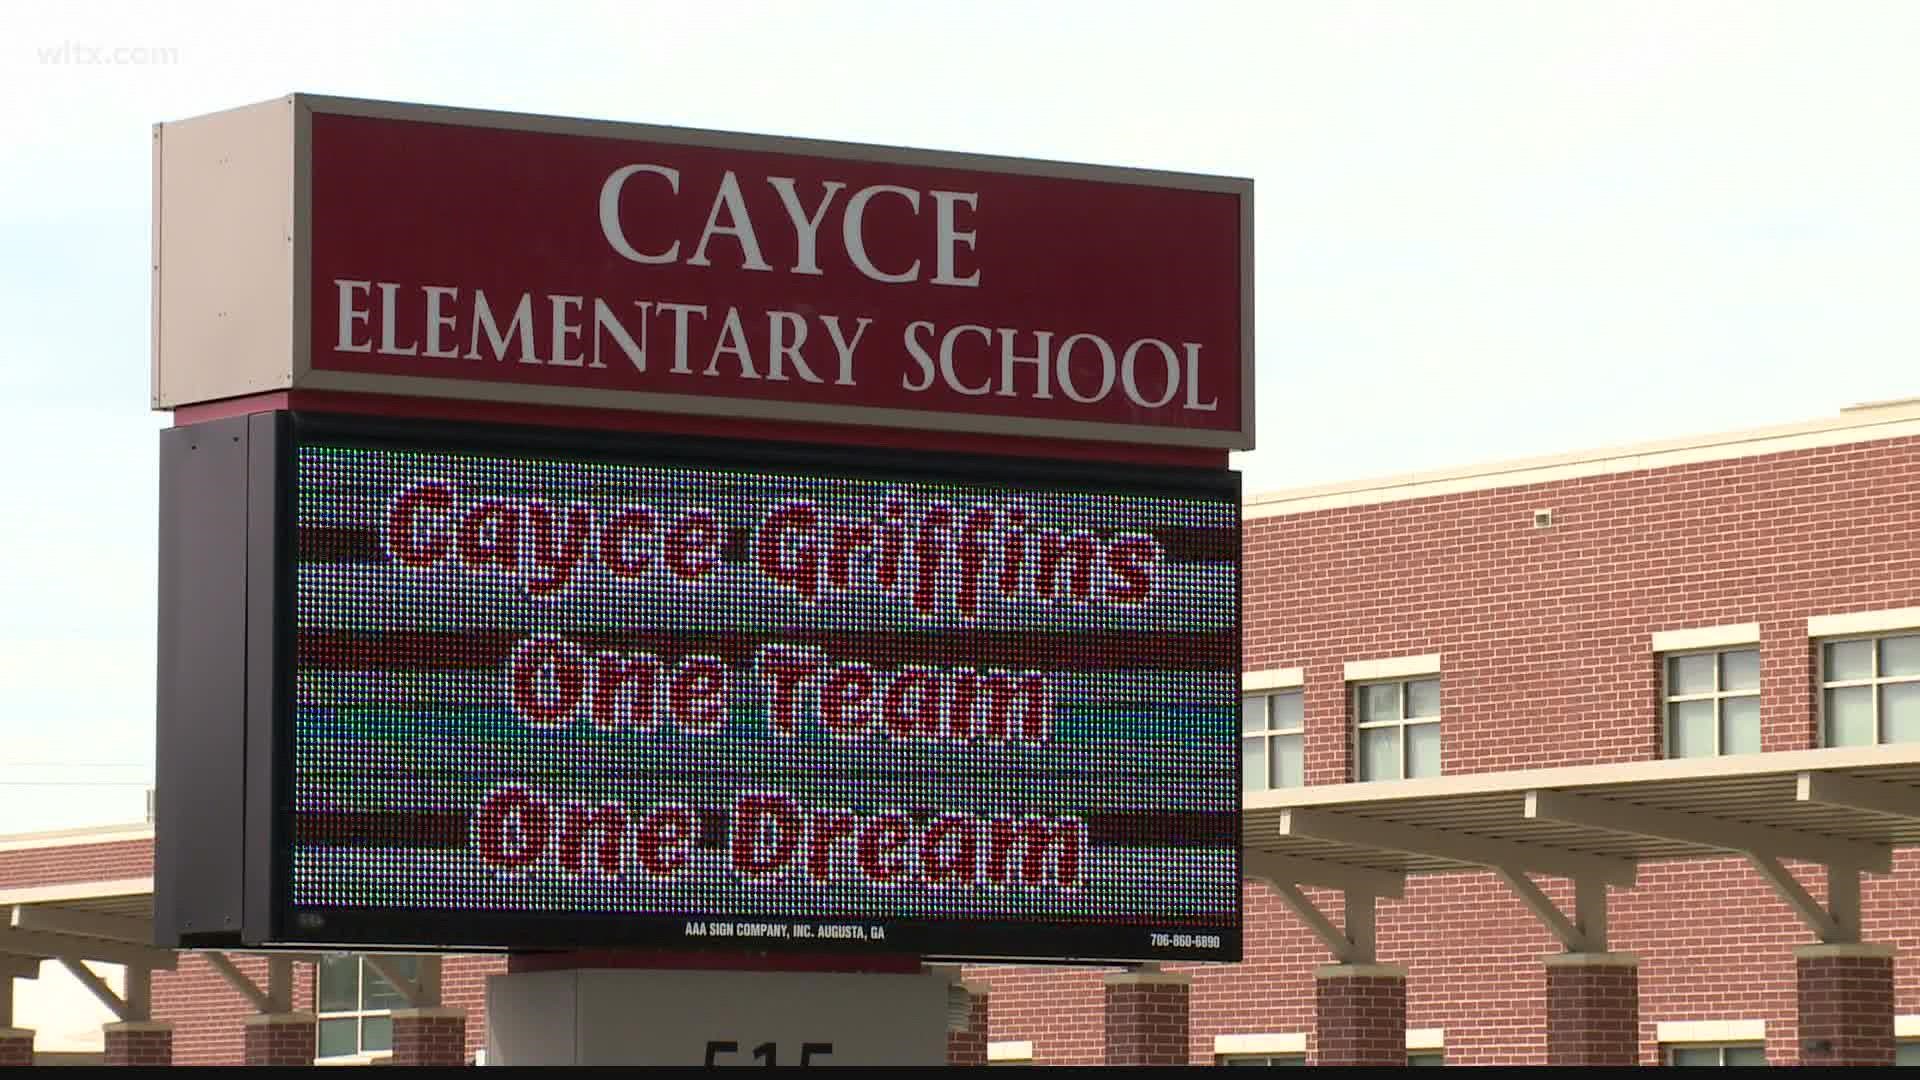 Cayce Elementary School is the first school in the Midlands to temporarily move to virtual learning due to COVID-19.